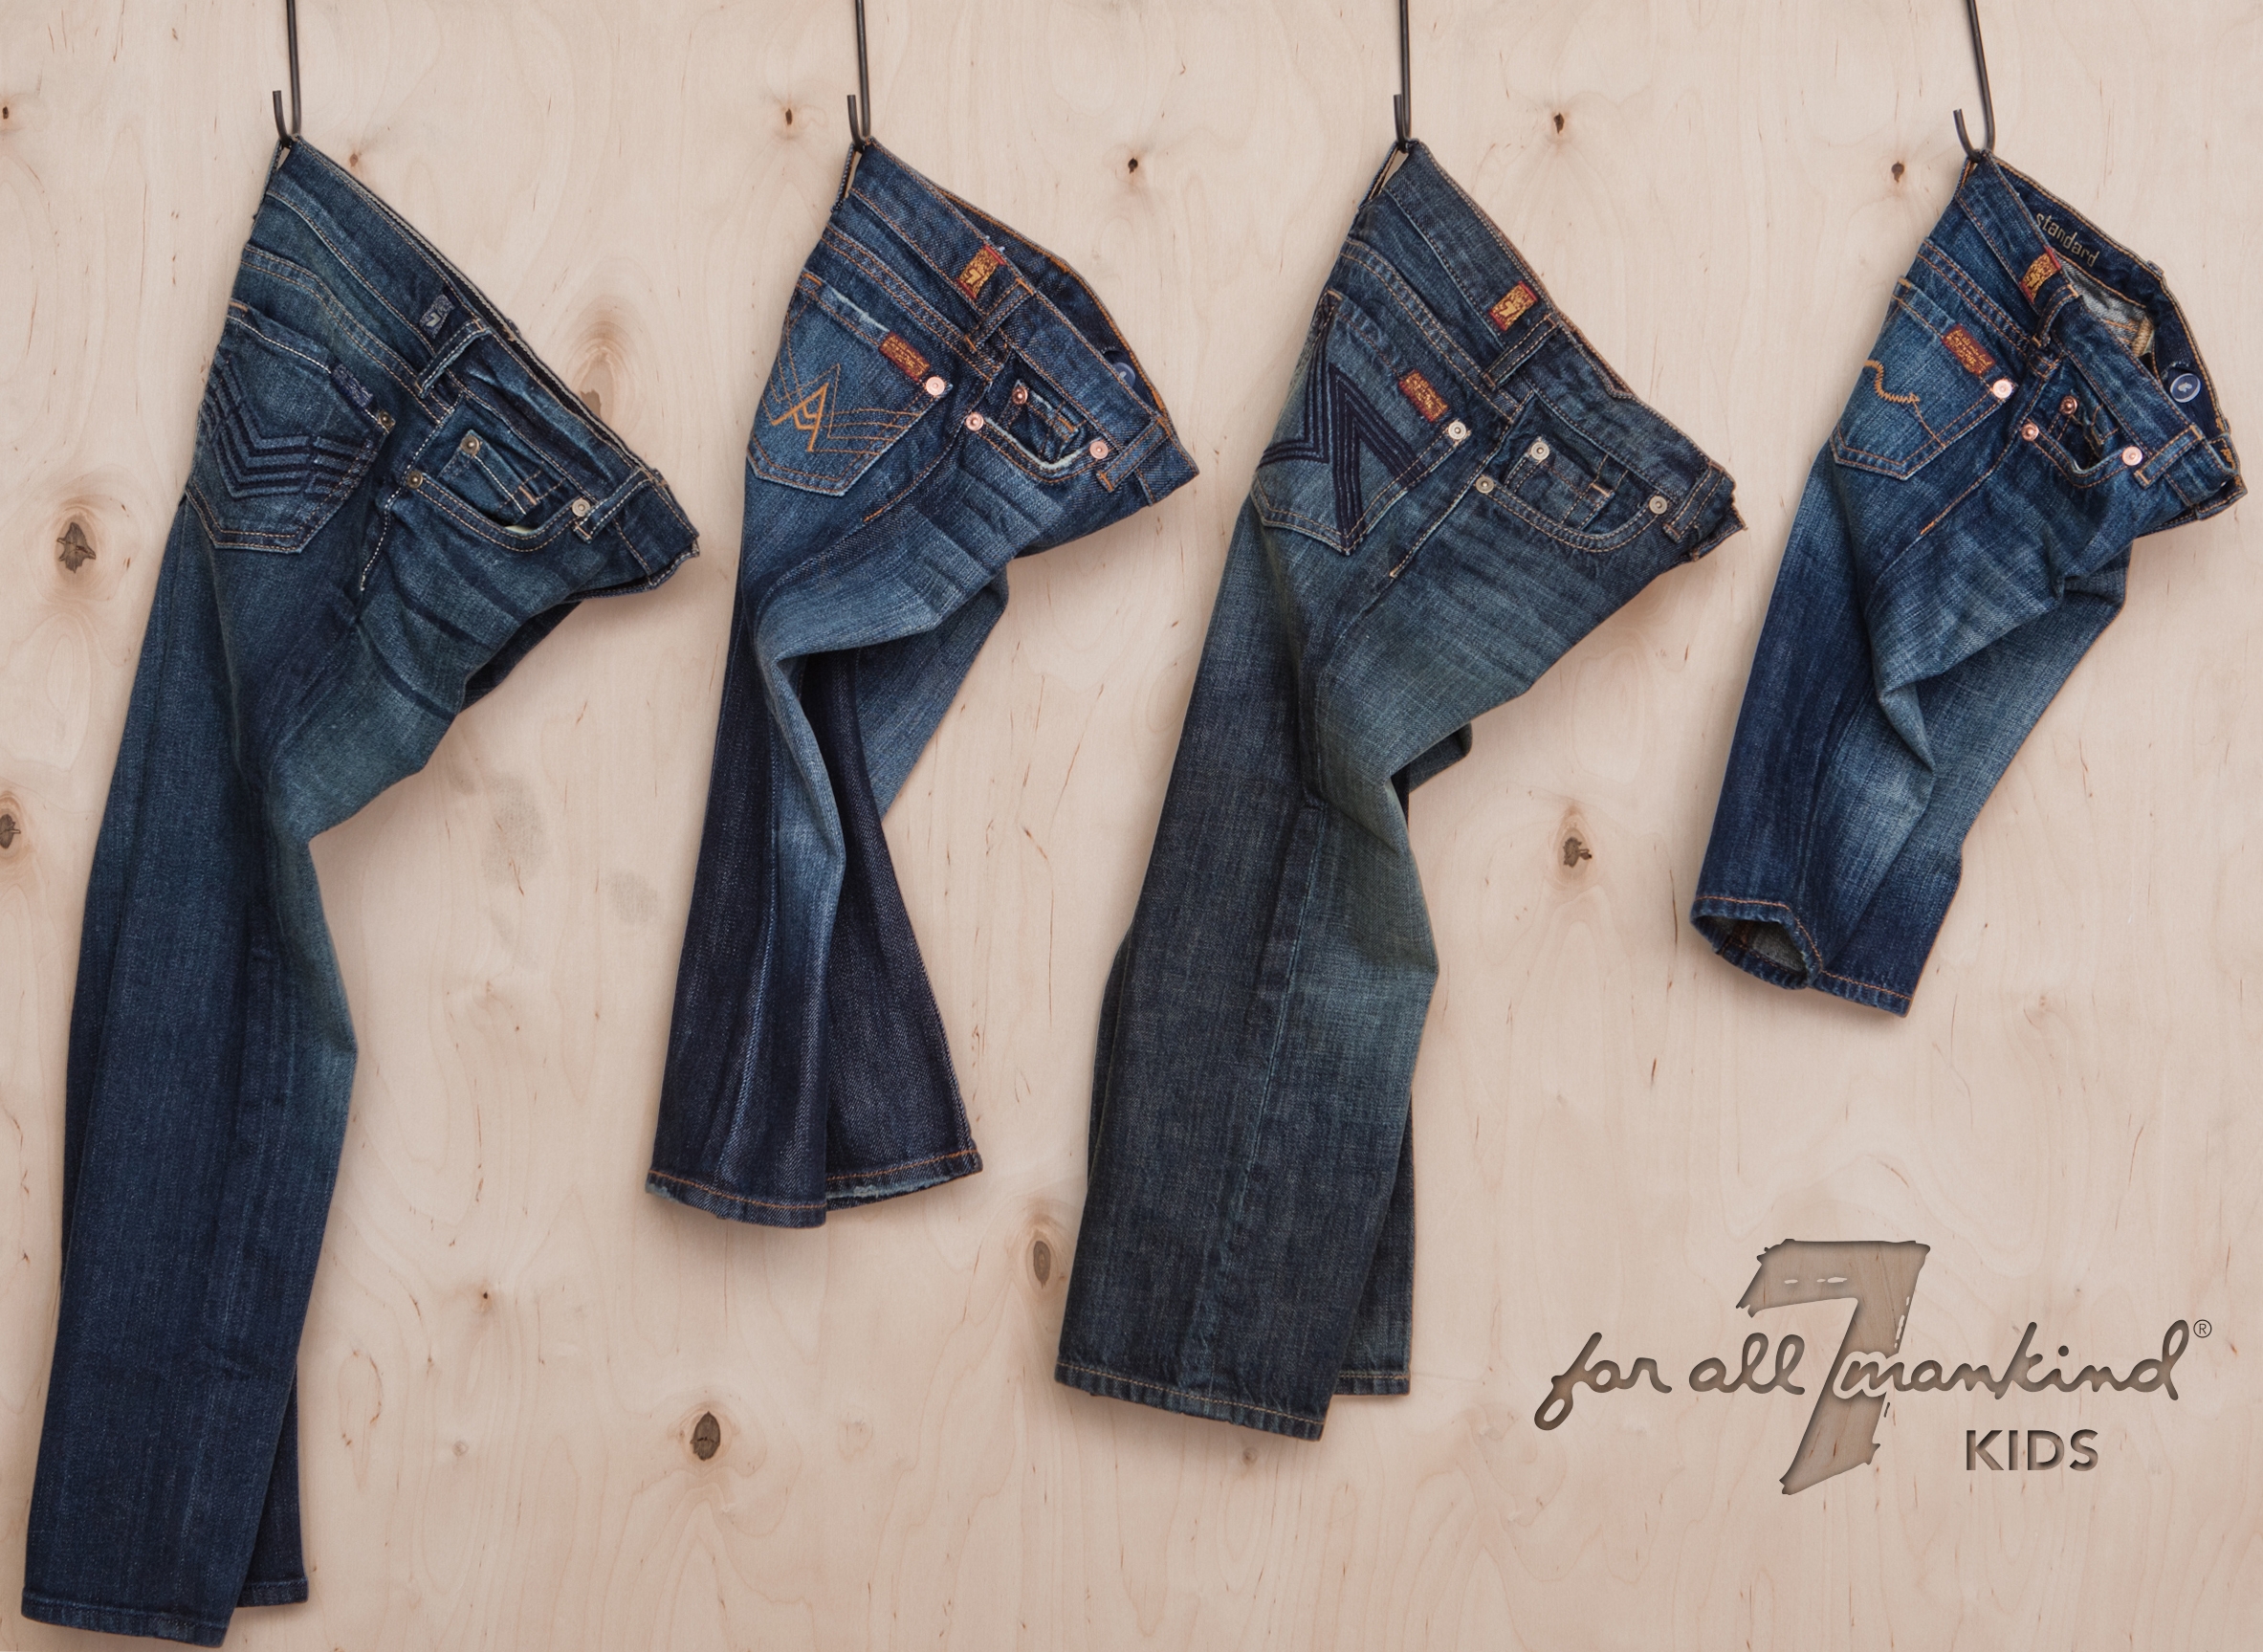 Jean Jacket Outfits For Women Top 10 Most Favorite - 7 For All Mankind - HD Wallpaper 